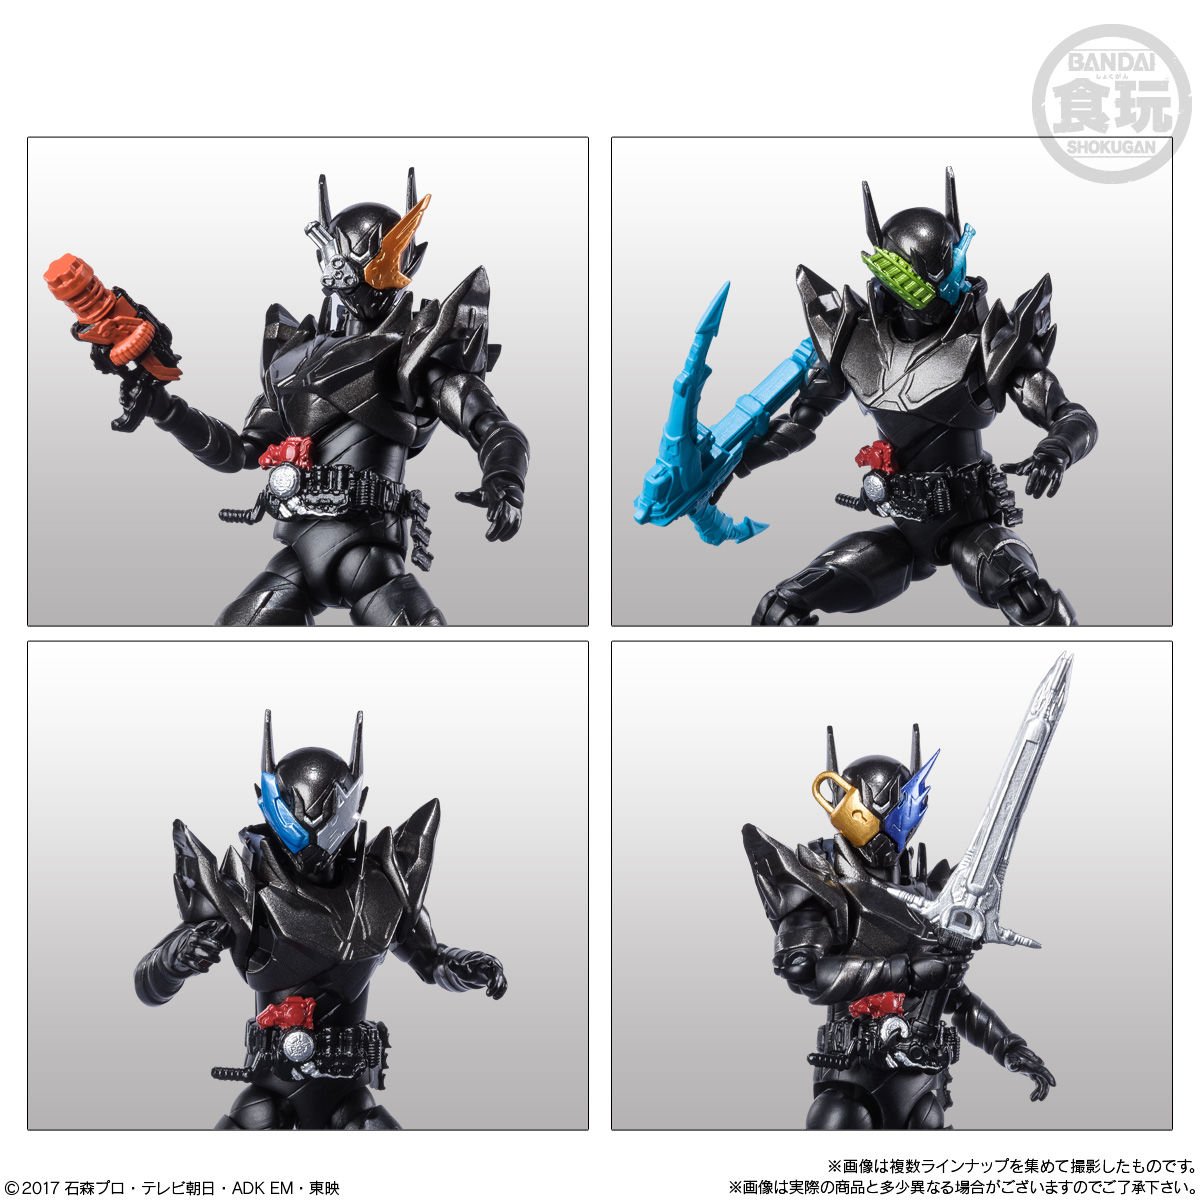 Next up is the DECADENT SHODO-X12 release featuring these beautiful build sculpts! The included accessory set will come with enough extra parts to recreate every hazard form! DON'T SLEEP ON THESE!